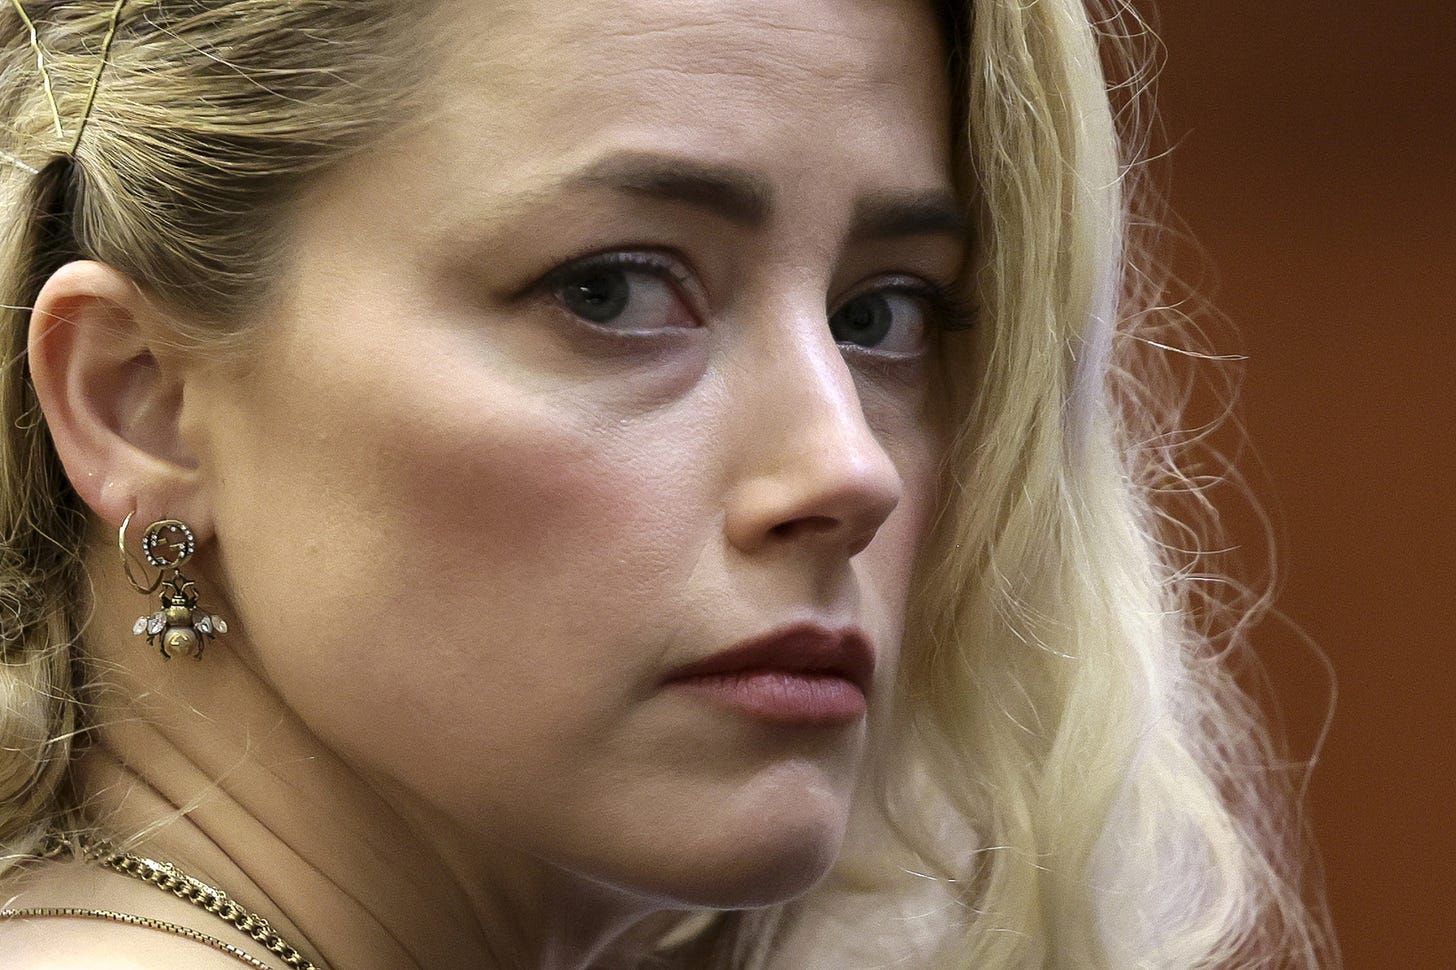 Insiders say comeback will be 'very hard' for Amber Heard